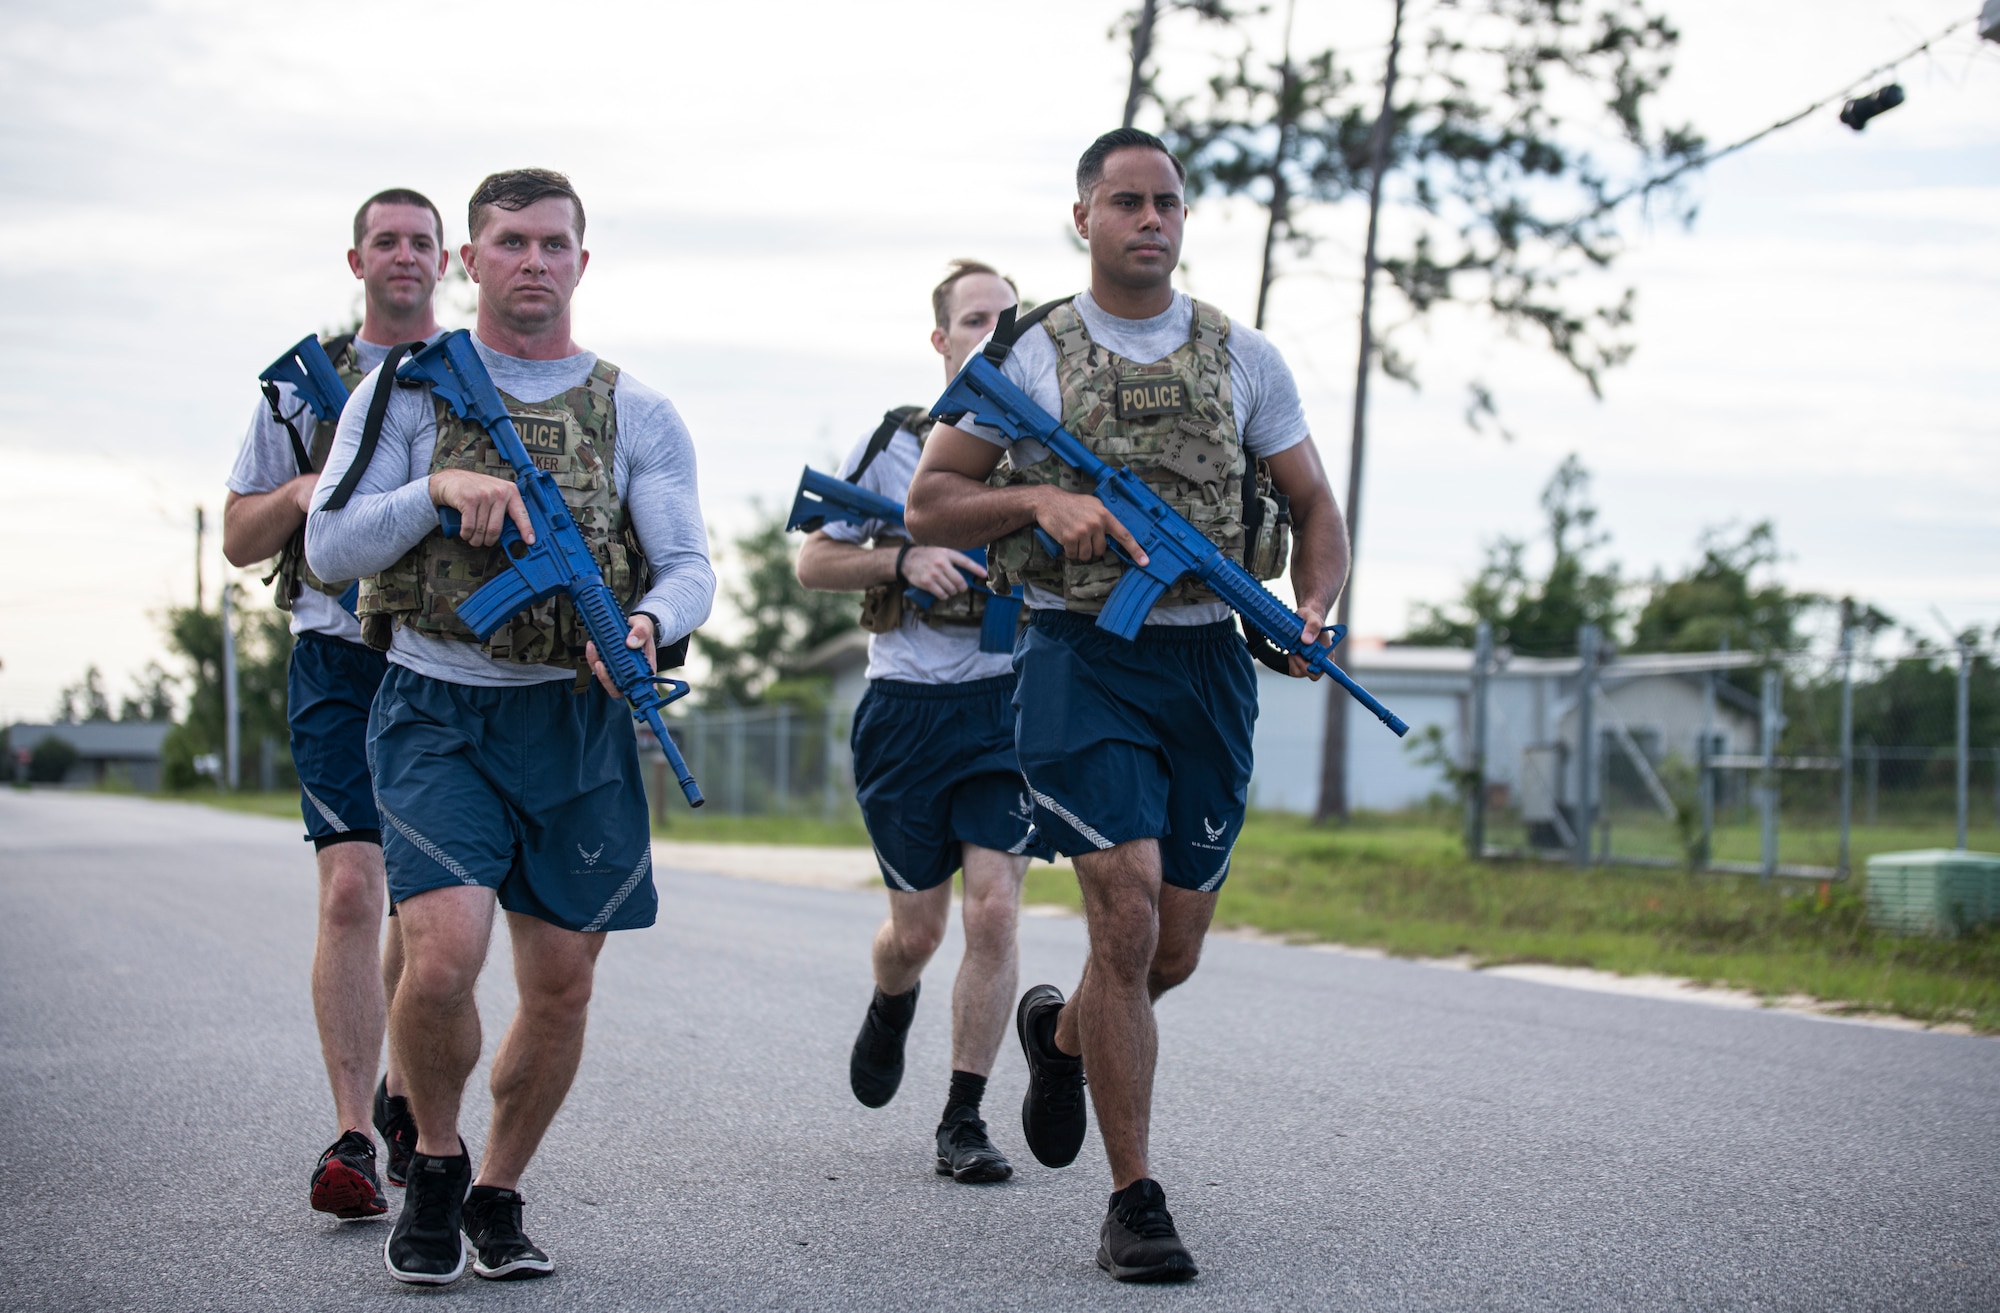 Members of the 325th Security Forces Squadron tactical response team run in formation at the Bay County Sheriff’s Office, Panama City, Florida, July 13, 2021. The 325th SFS is determining the effectiveness of standing up a specialized security forces team that trains with local police departments to handle high-threat situations, such as barricaded suspects, hostage situations and mass shootings. (U.S. Air Force photo by Staff Sgt. Stefan Alvarez)